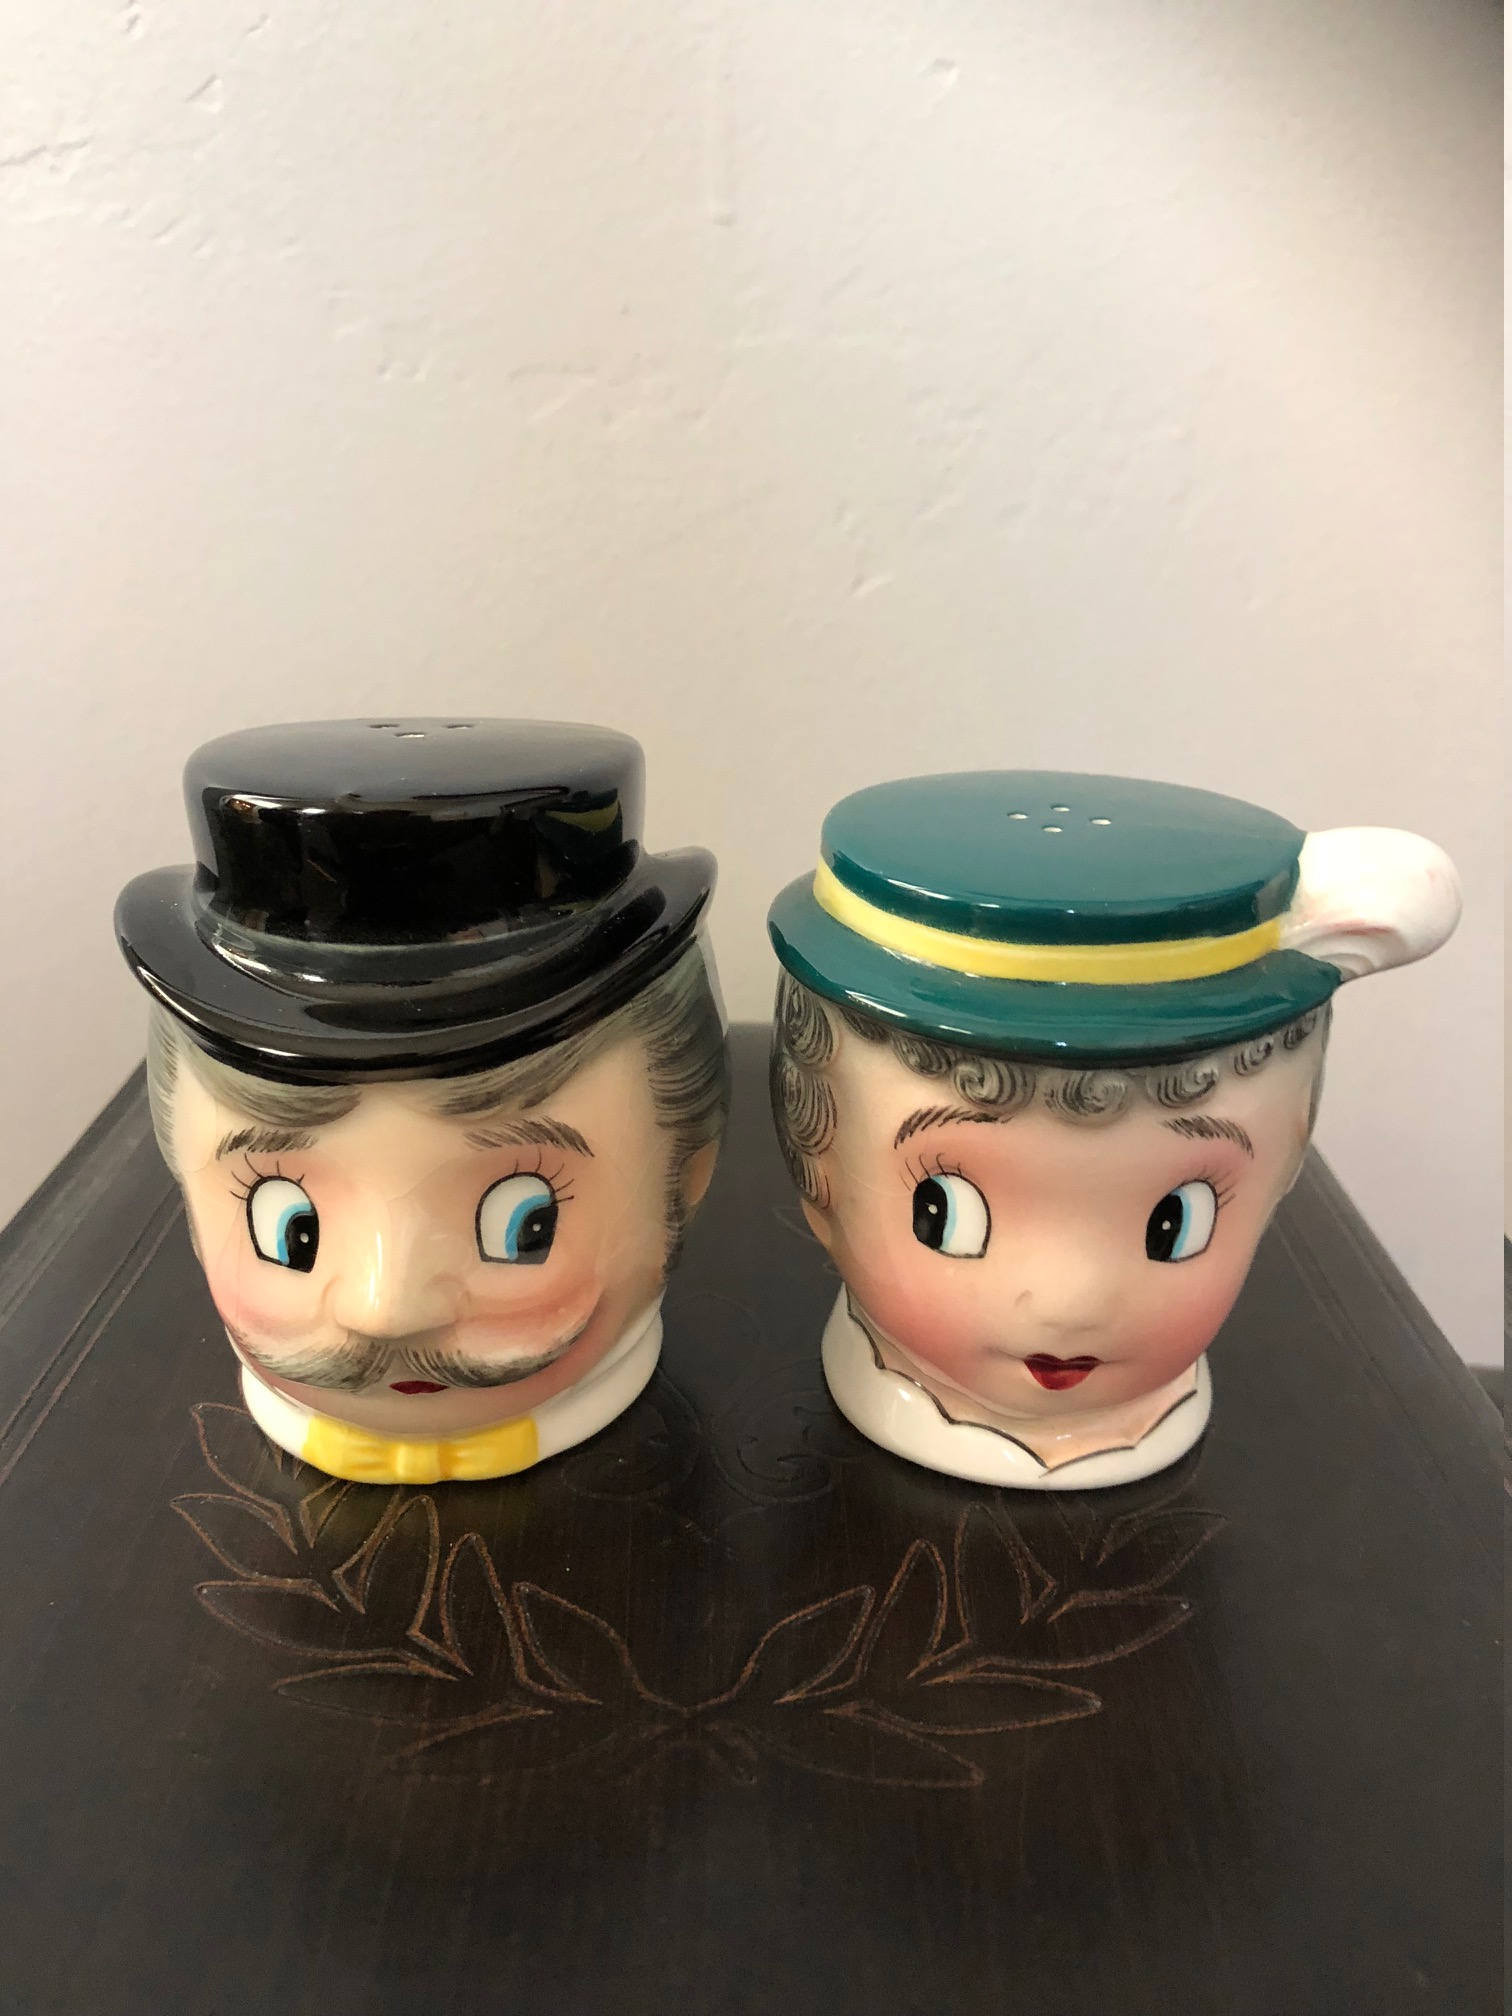 vintage napco lady head vase of vintage py gay lady and man salt and pepper shakers etsy regarding dzoom